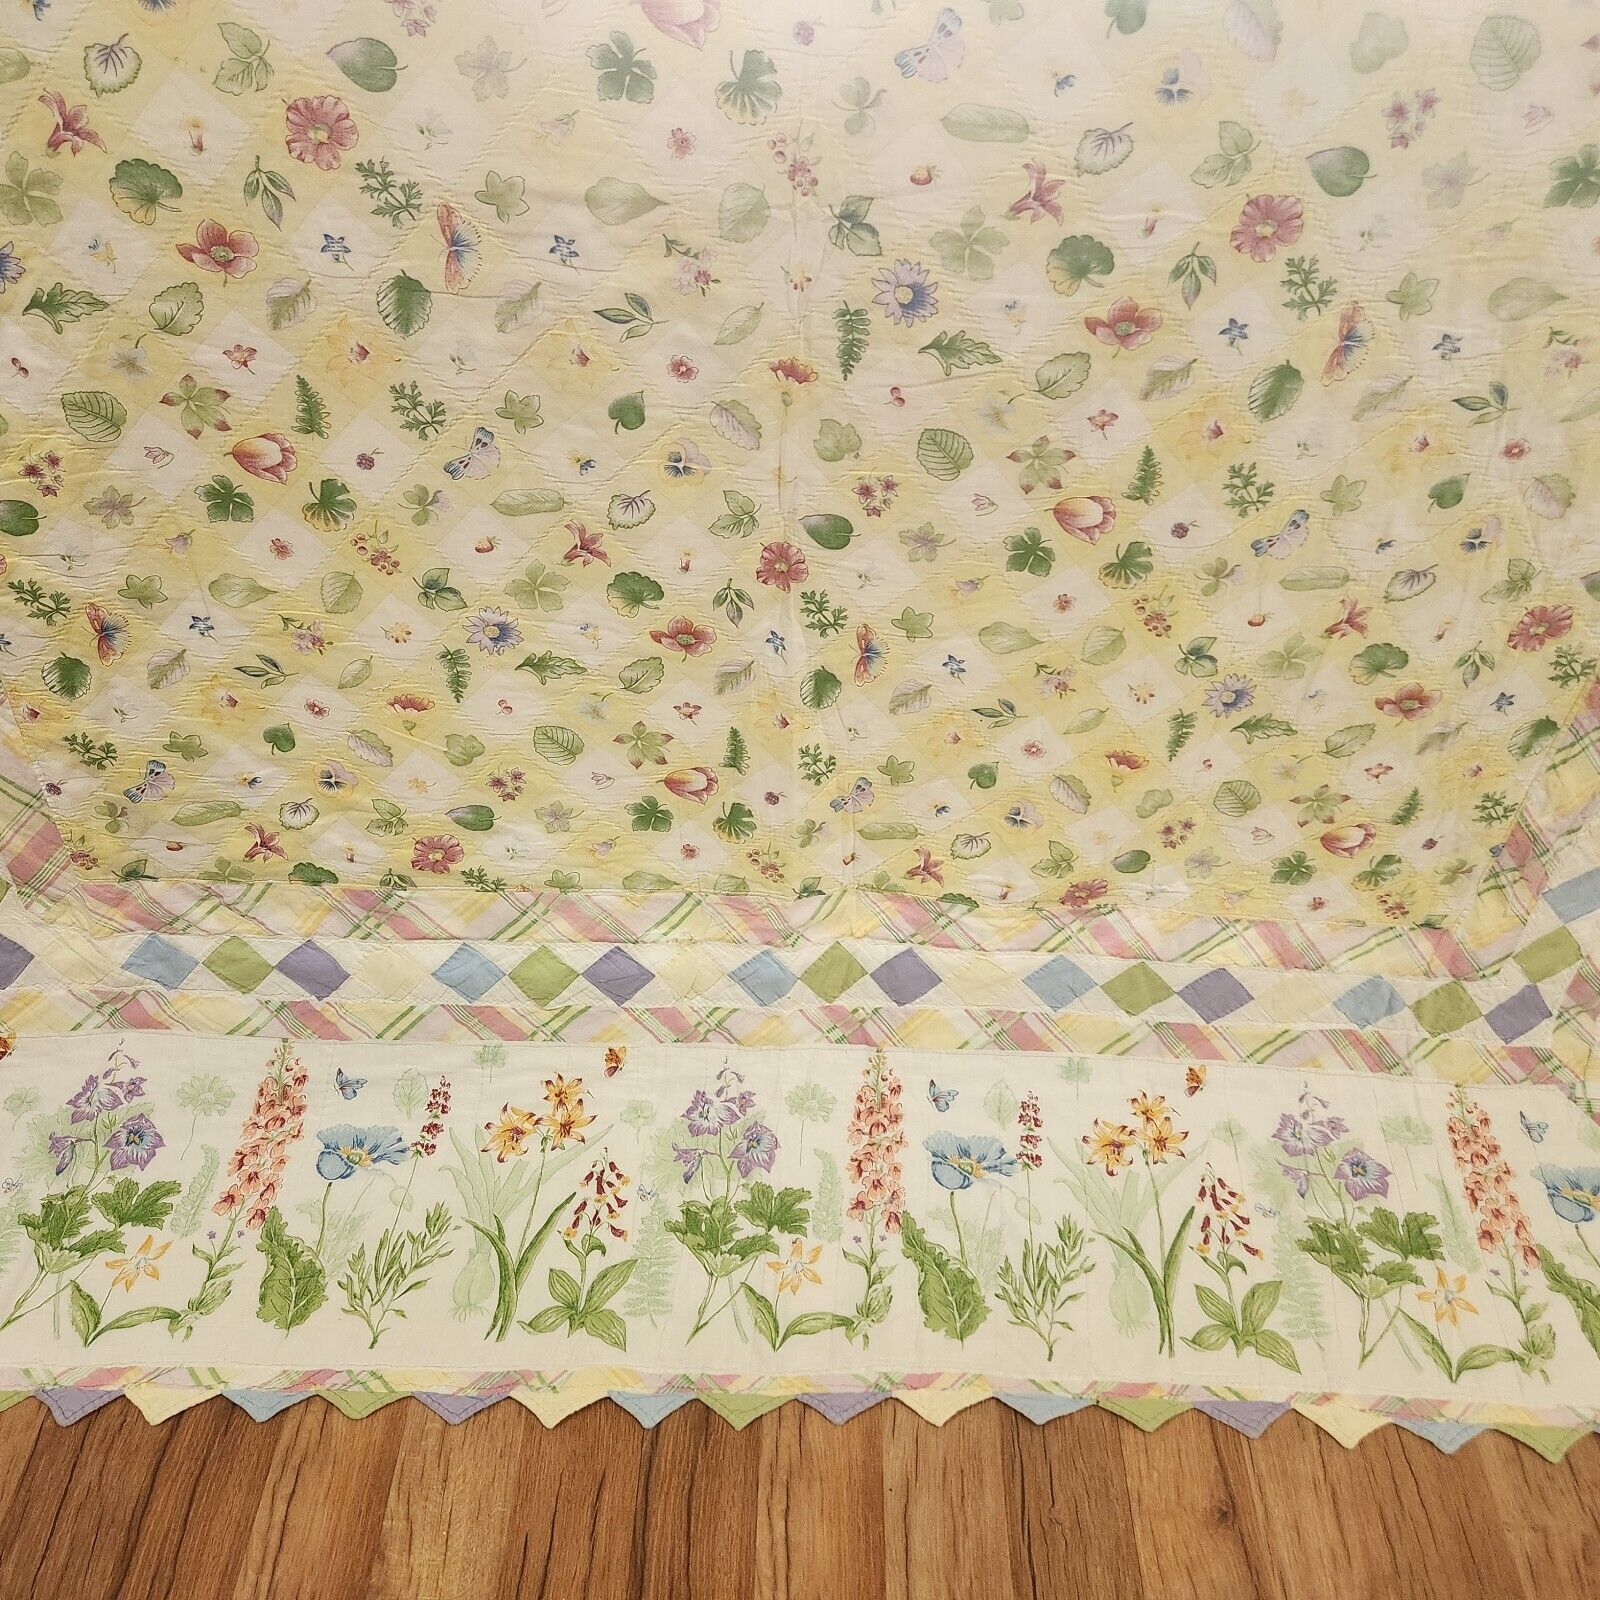 Vintage 80s Hand Stitched Quilt Queen Wild Flowers Floral Country Yellow Pink